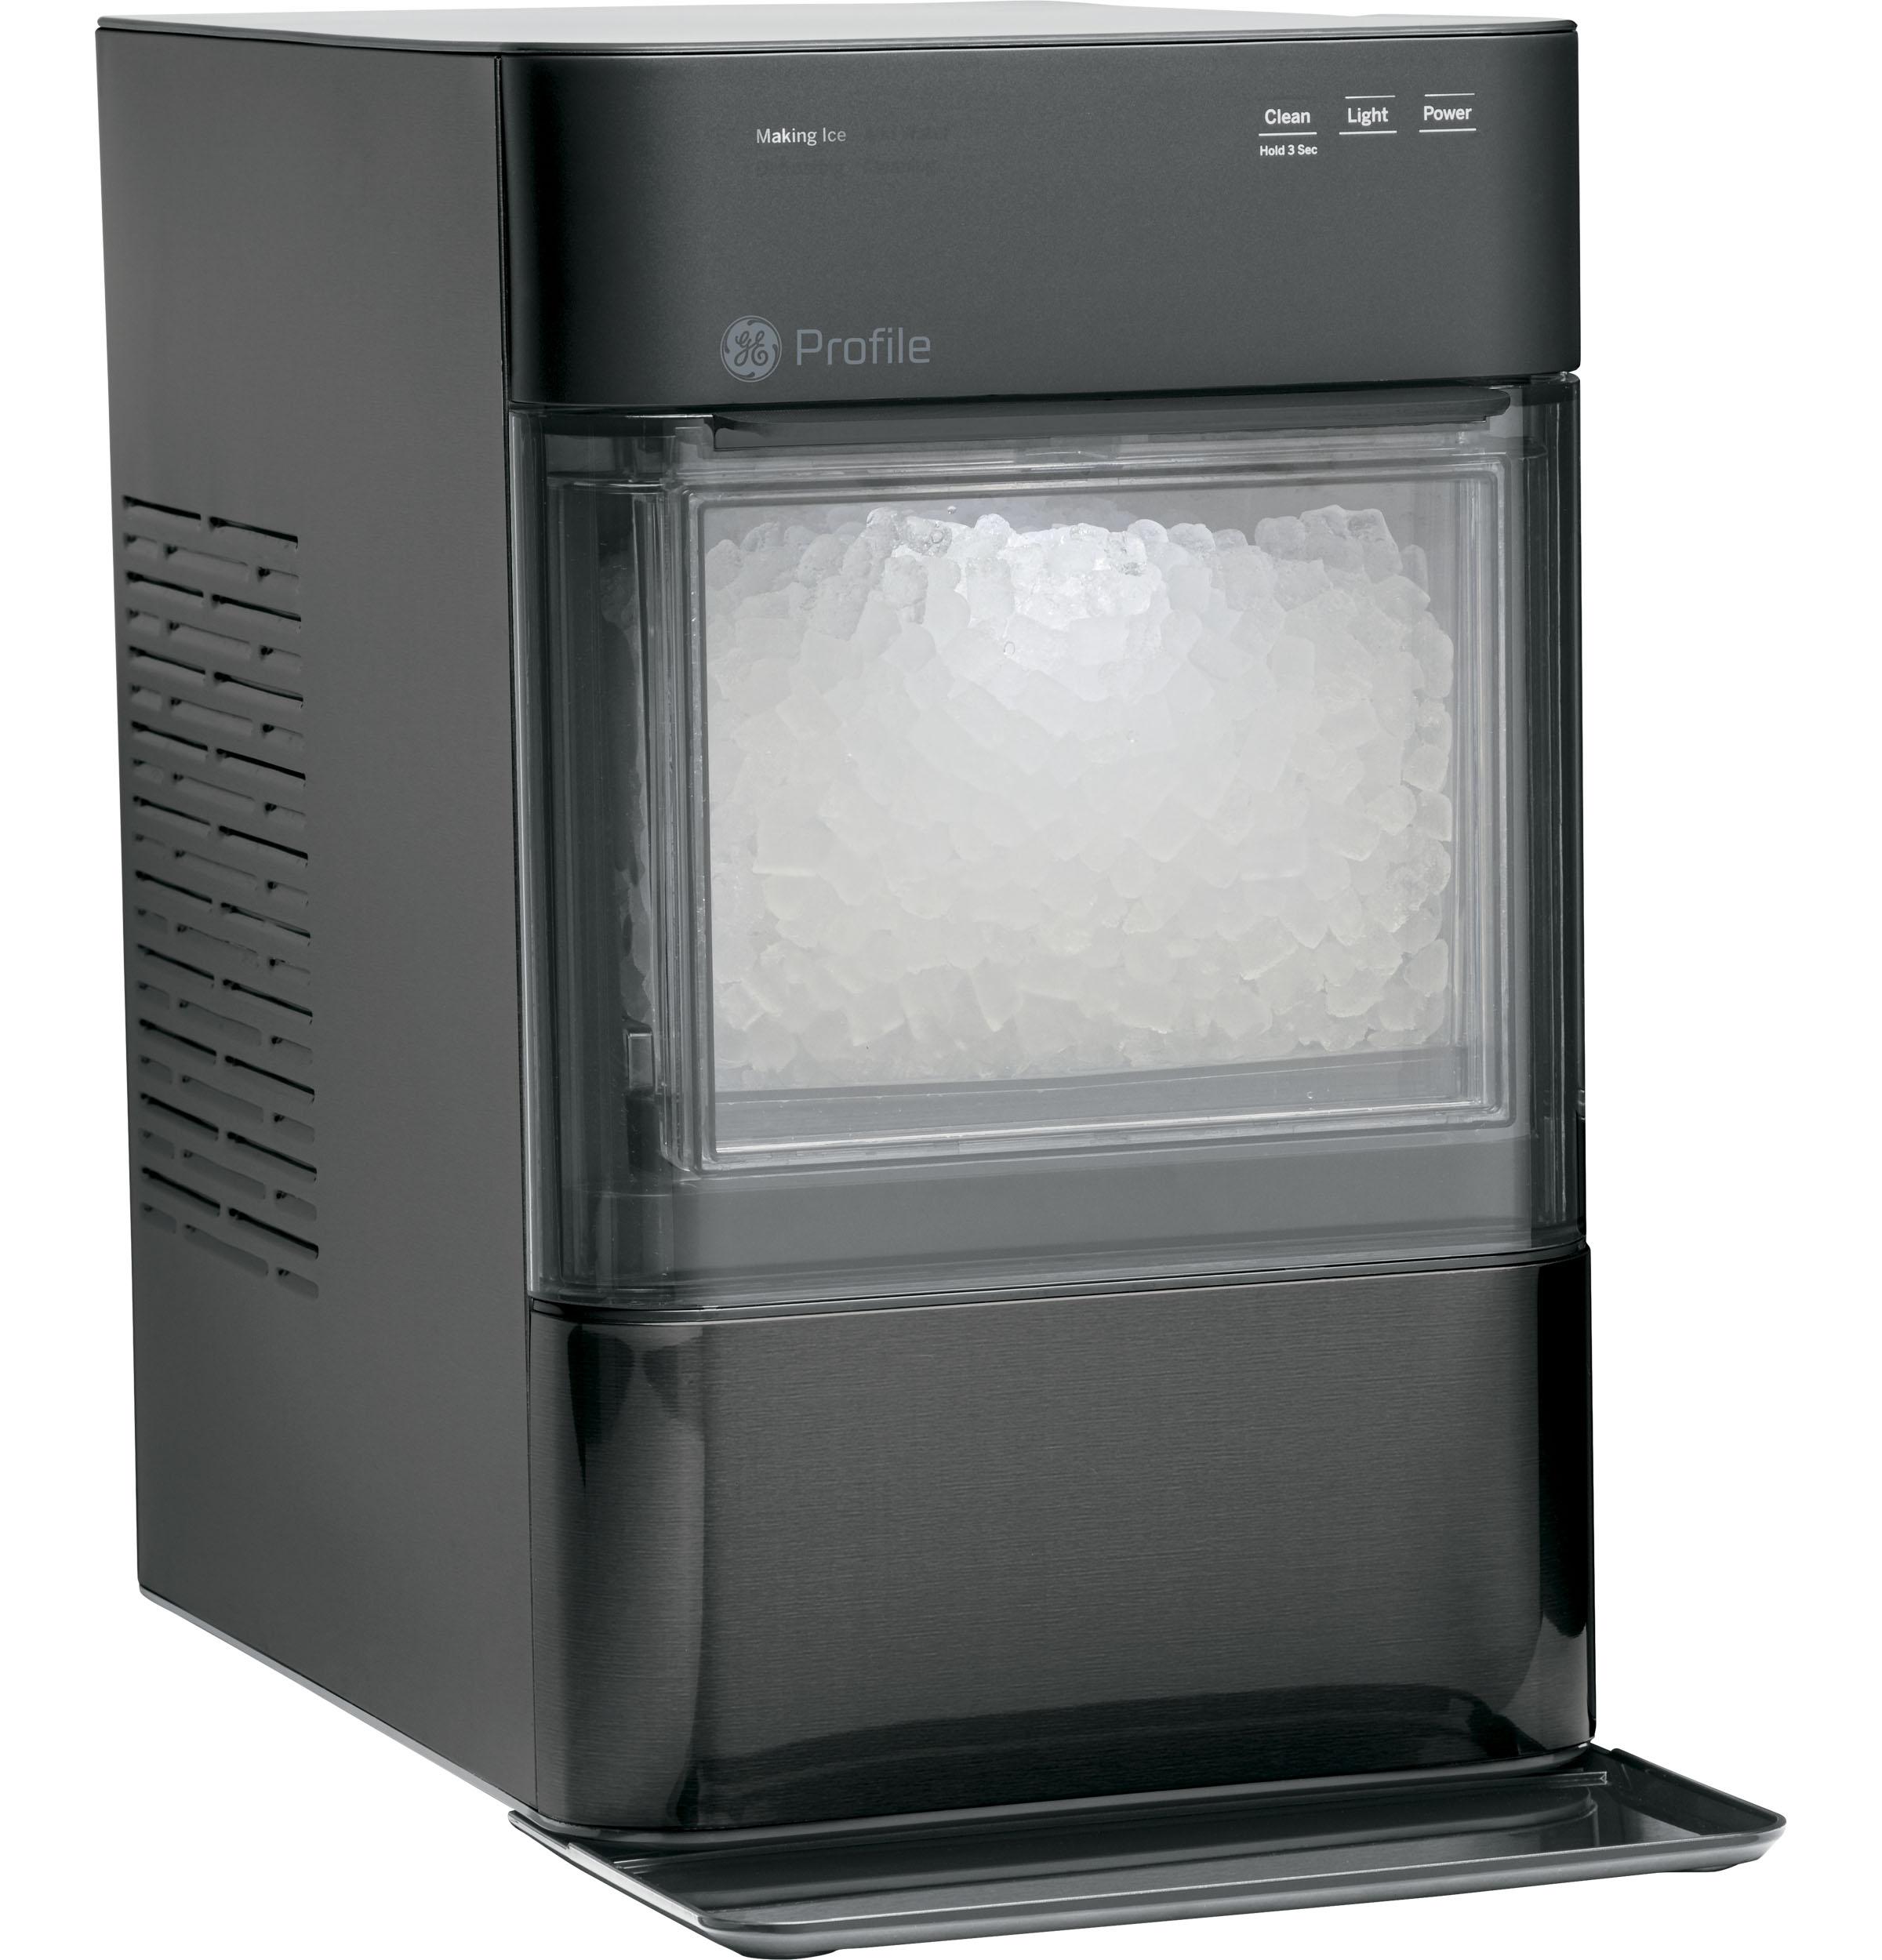 Features of the GE Profile Opal 2.0 Countertop Nugget Ice Maker